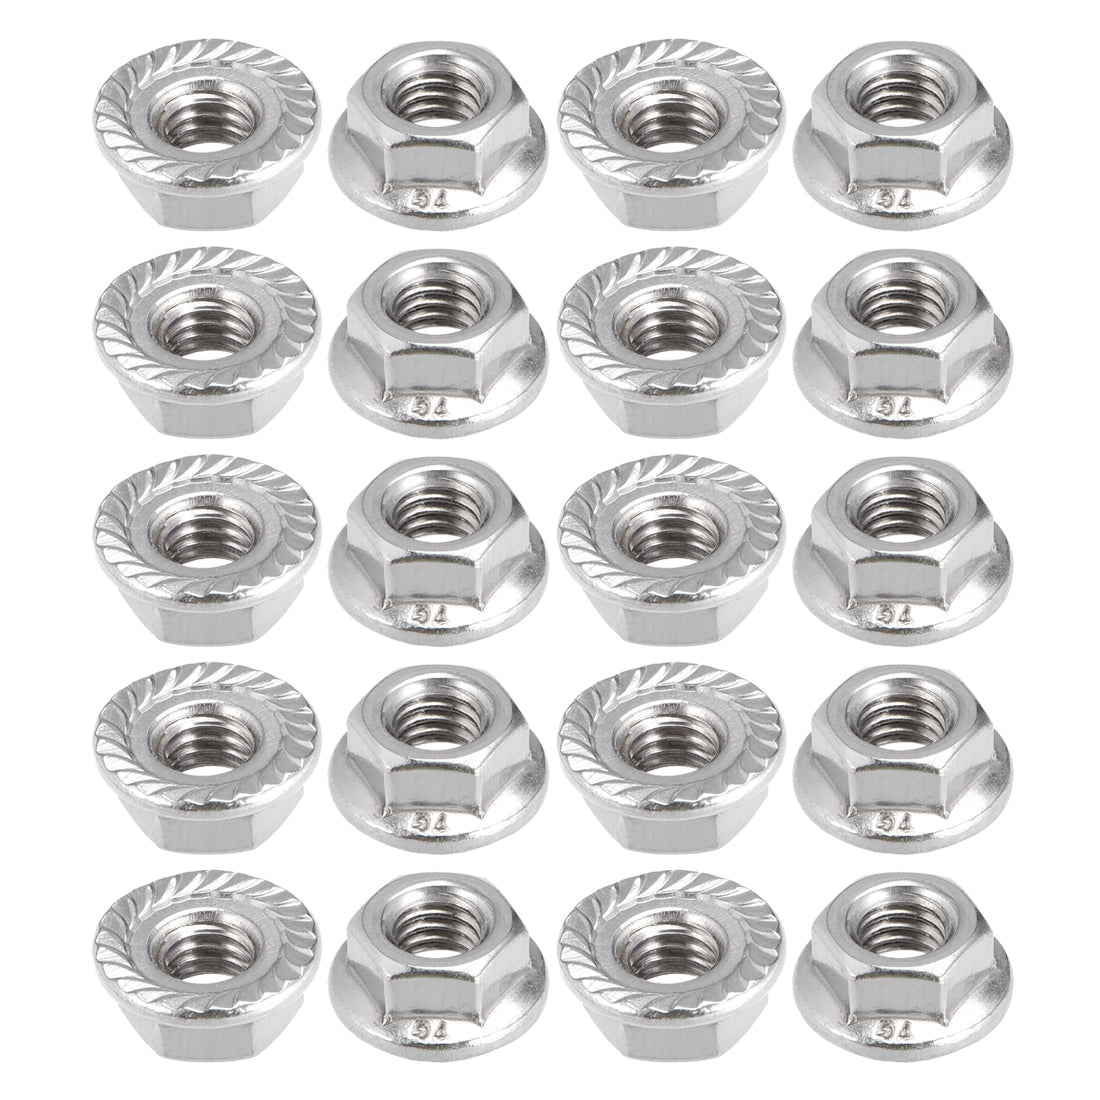 Uxcell Uxcell M8 Serrated Flange Hex Lock Nuts, 201 Stainless Steel, 20 Pcs